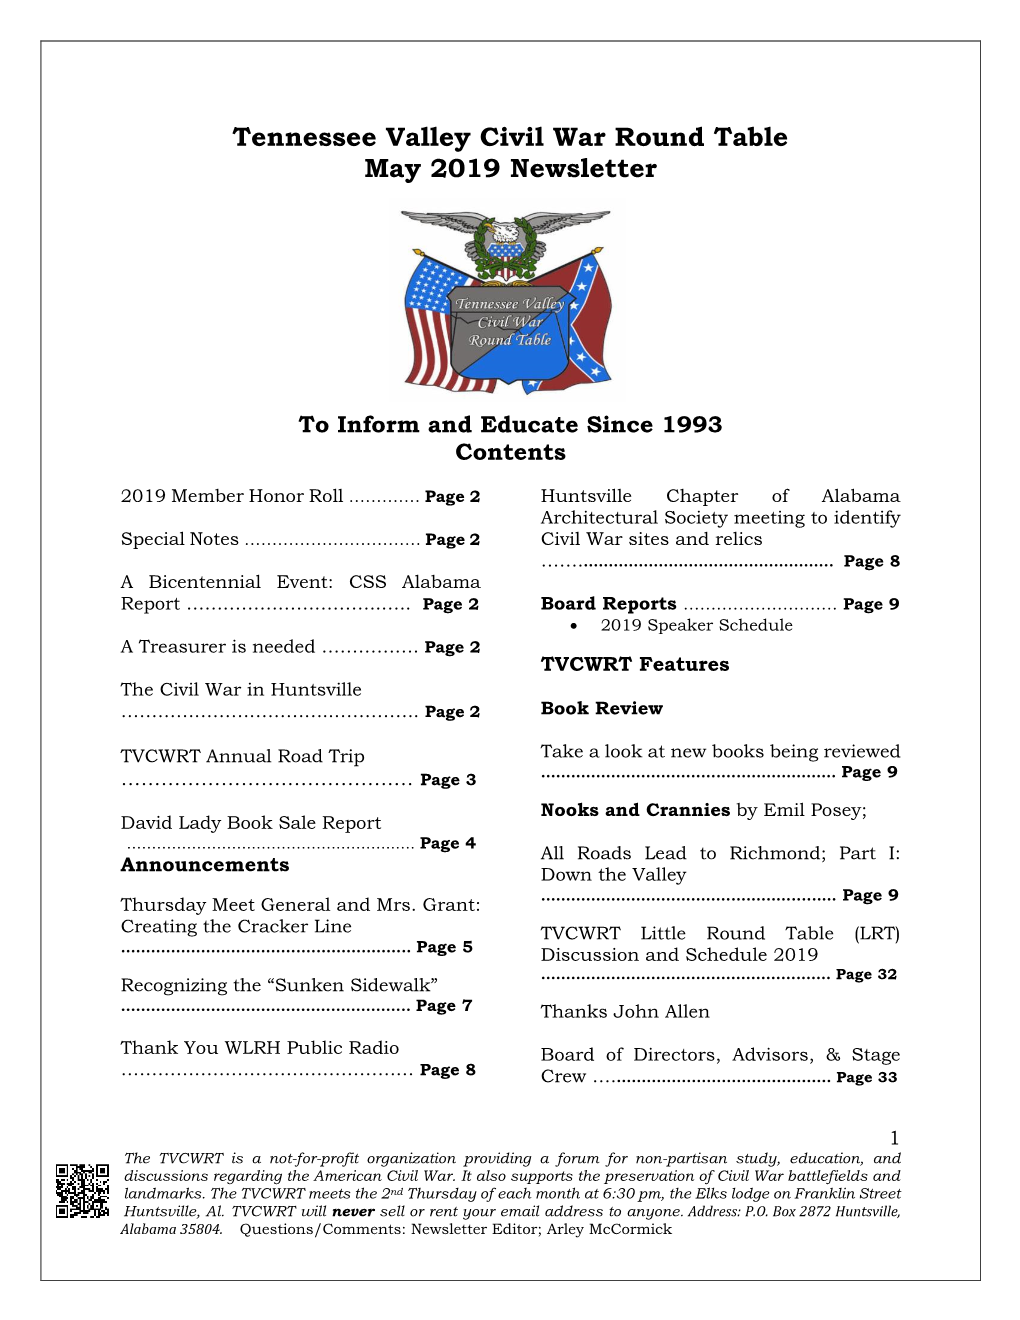 Tennessee Valley Civil War Round Table May 2019 Newsletter